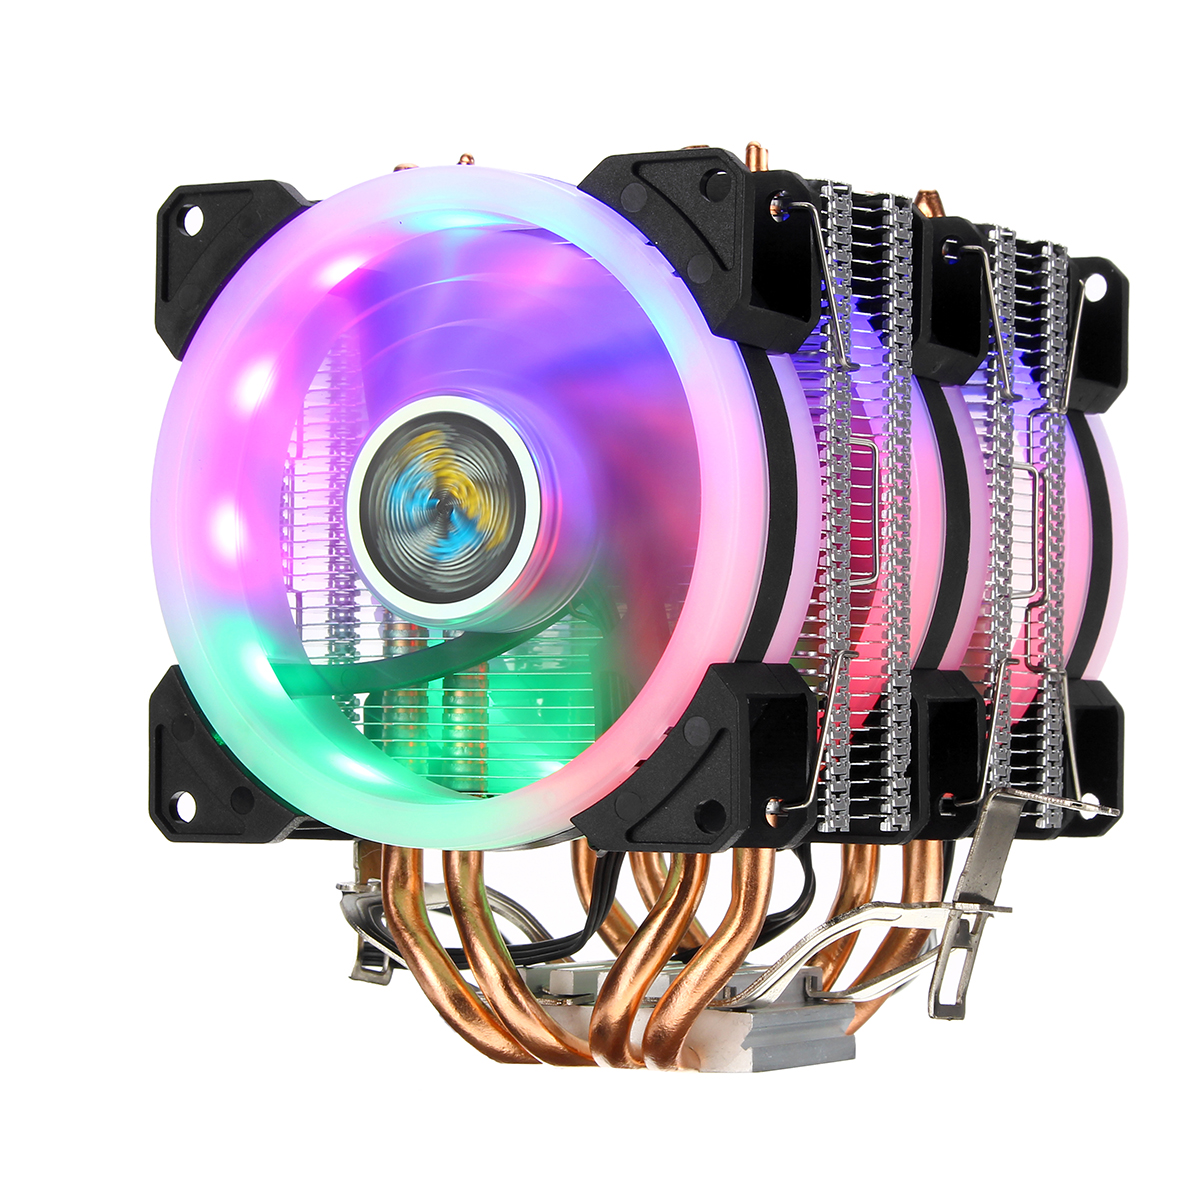 

Aurora Colorful Backlit 3Pin 3 Fans 4 Copper Tube Dual Tower CPUCooling Fan Cooler Heatsink for Intel AMD